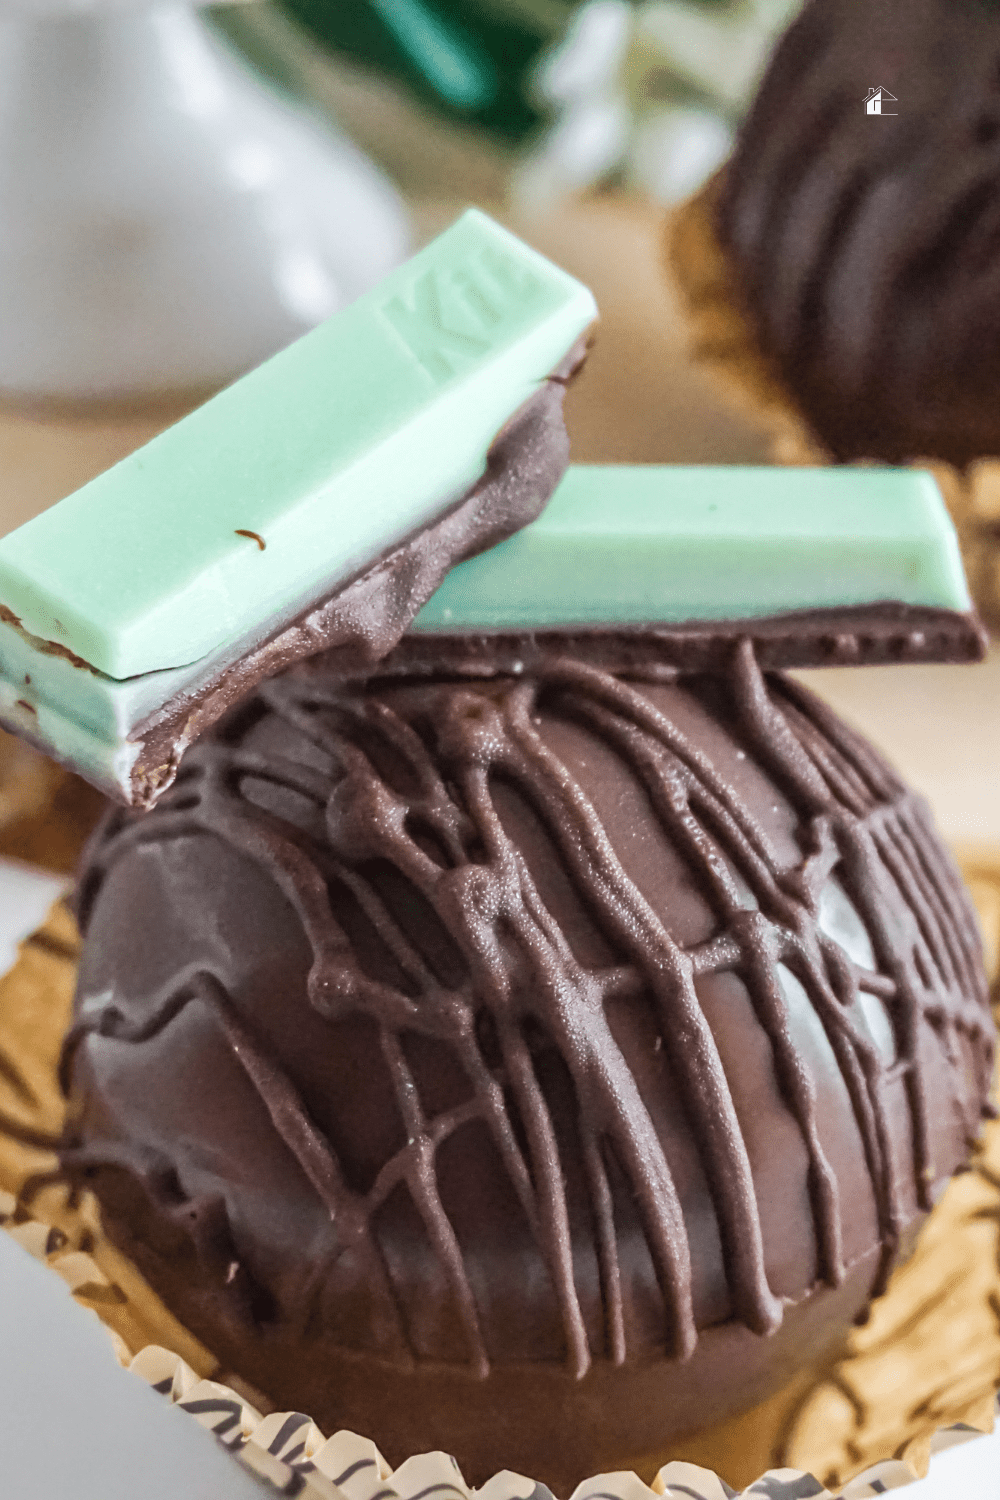 Try this delicious and easy recipe for a Mint Kit Kat Hot Cocoa Bomb this winter. It's the perfect drink to keep you warm! via @mystayathome